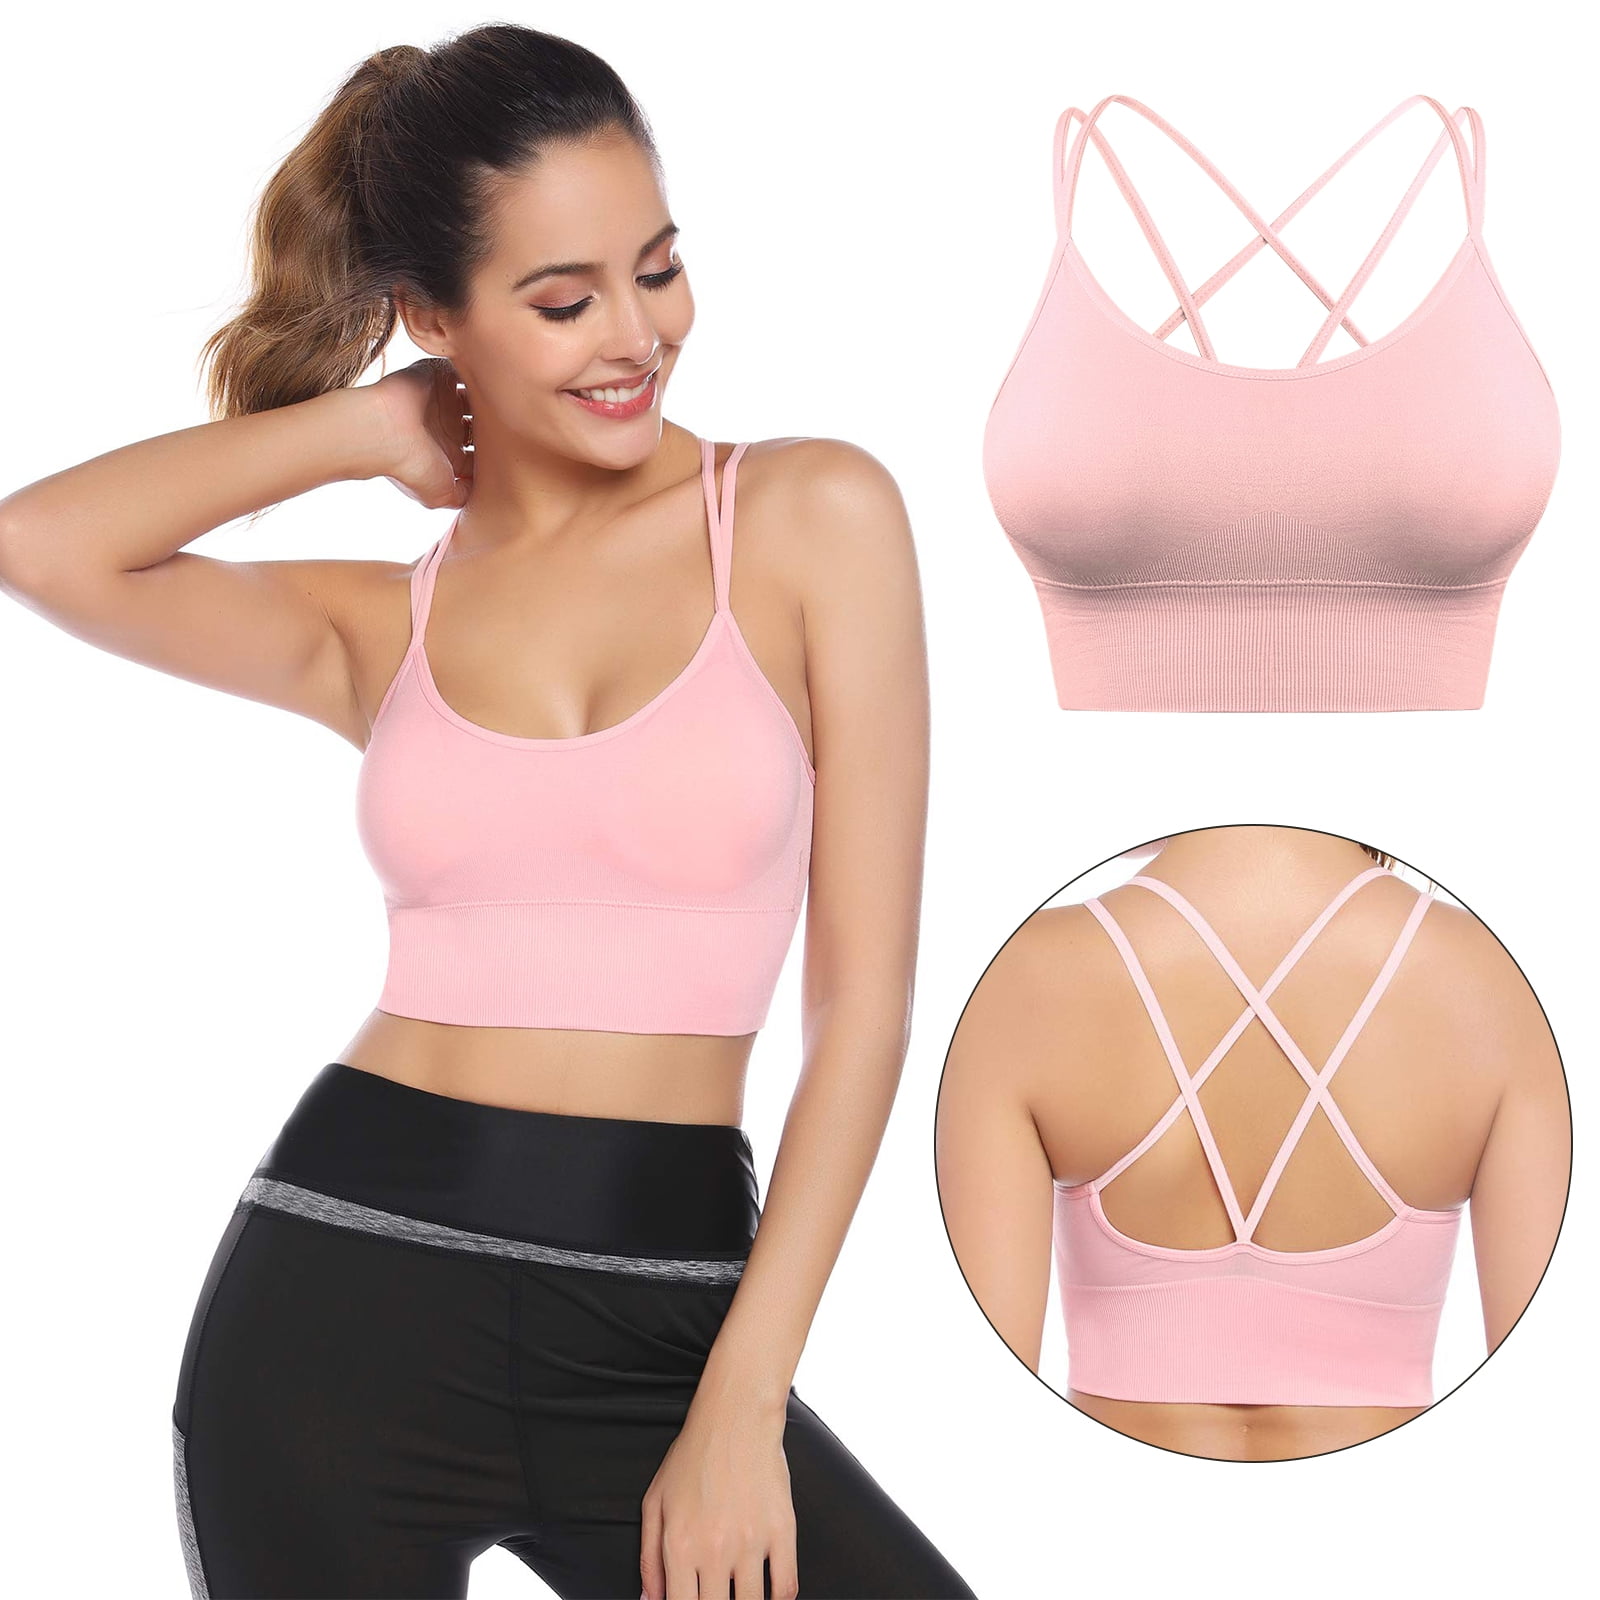 Women's Strappy Sports Bra with Pad, Sexy Crisscross Back Small